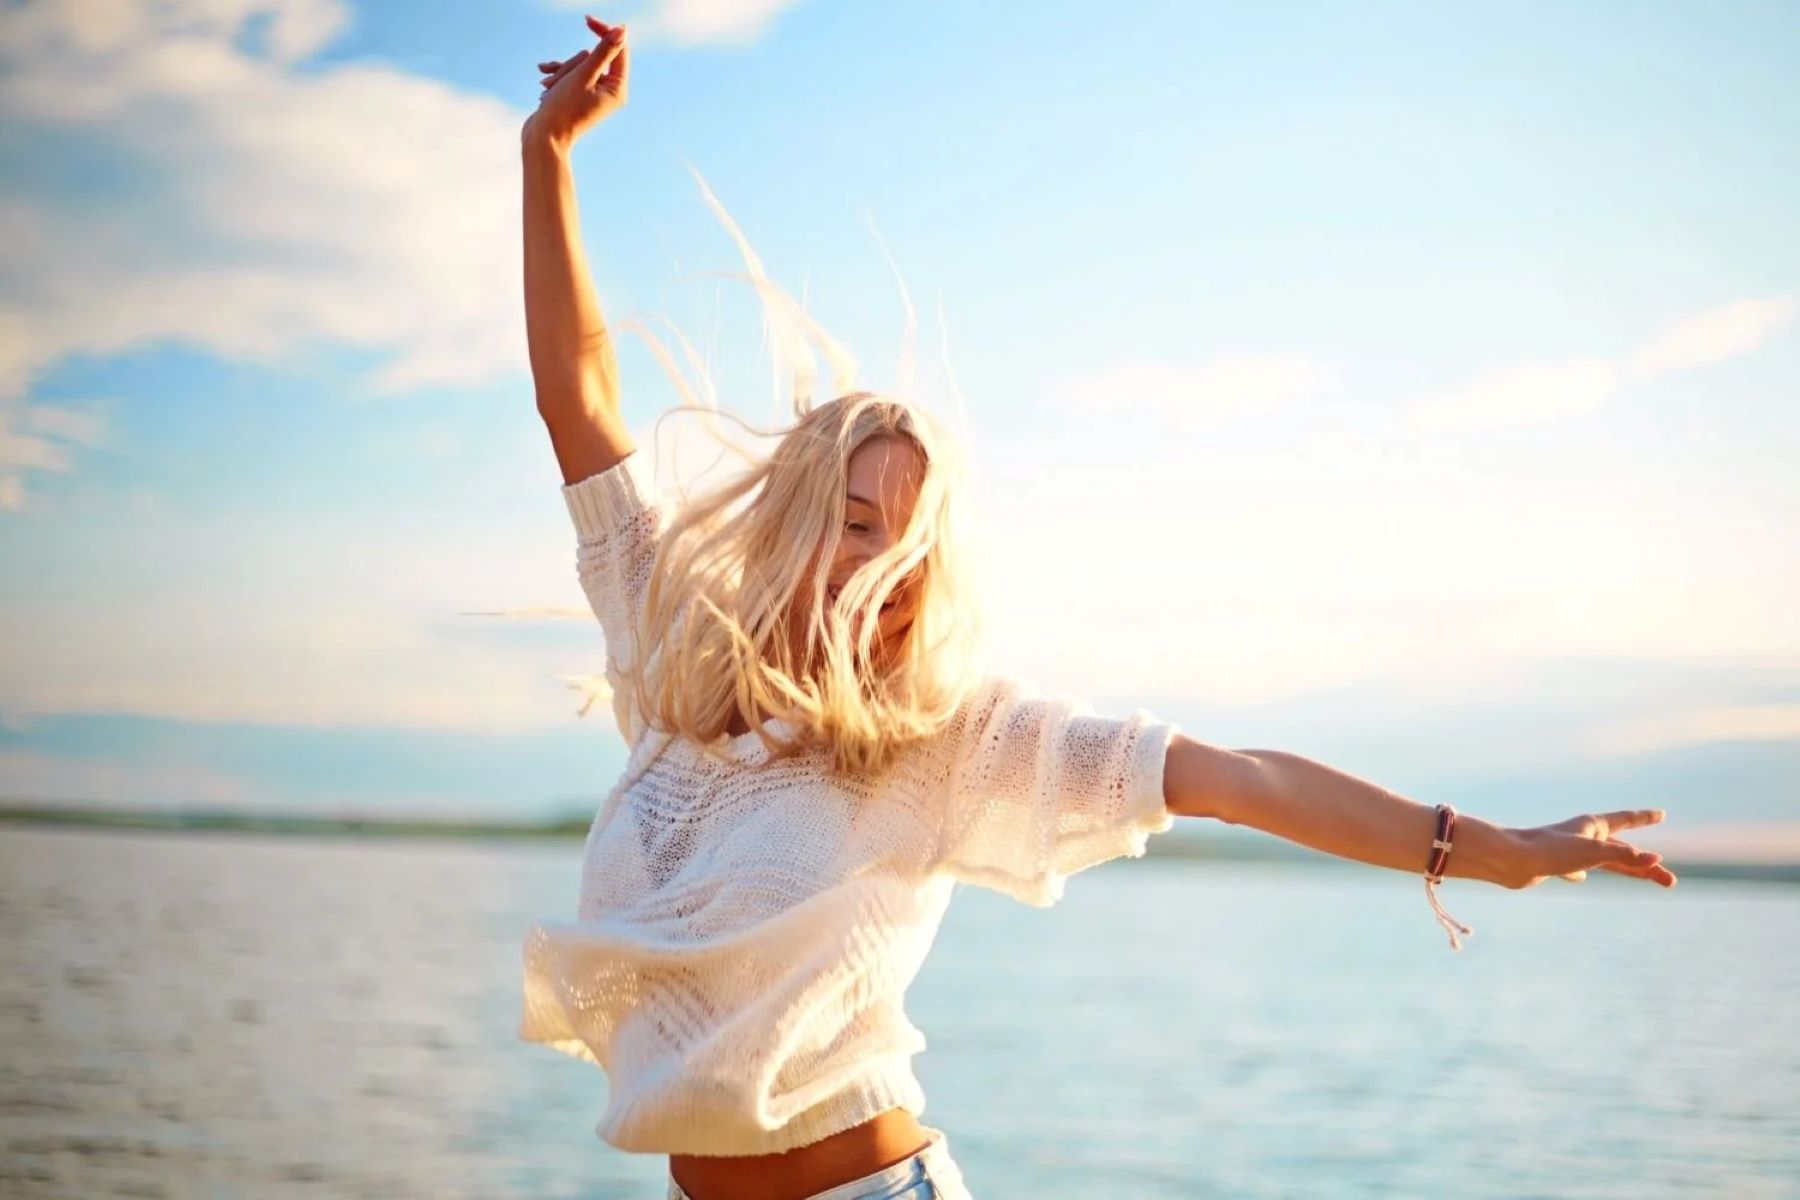 10 Metaphors That Perfectly Capture The Bliss Of Happiness